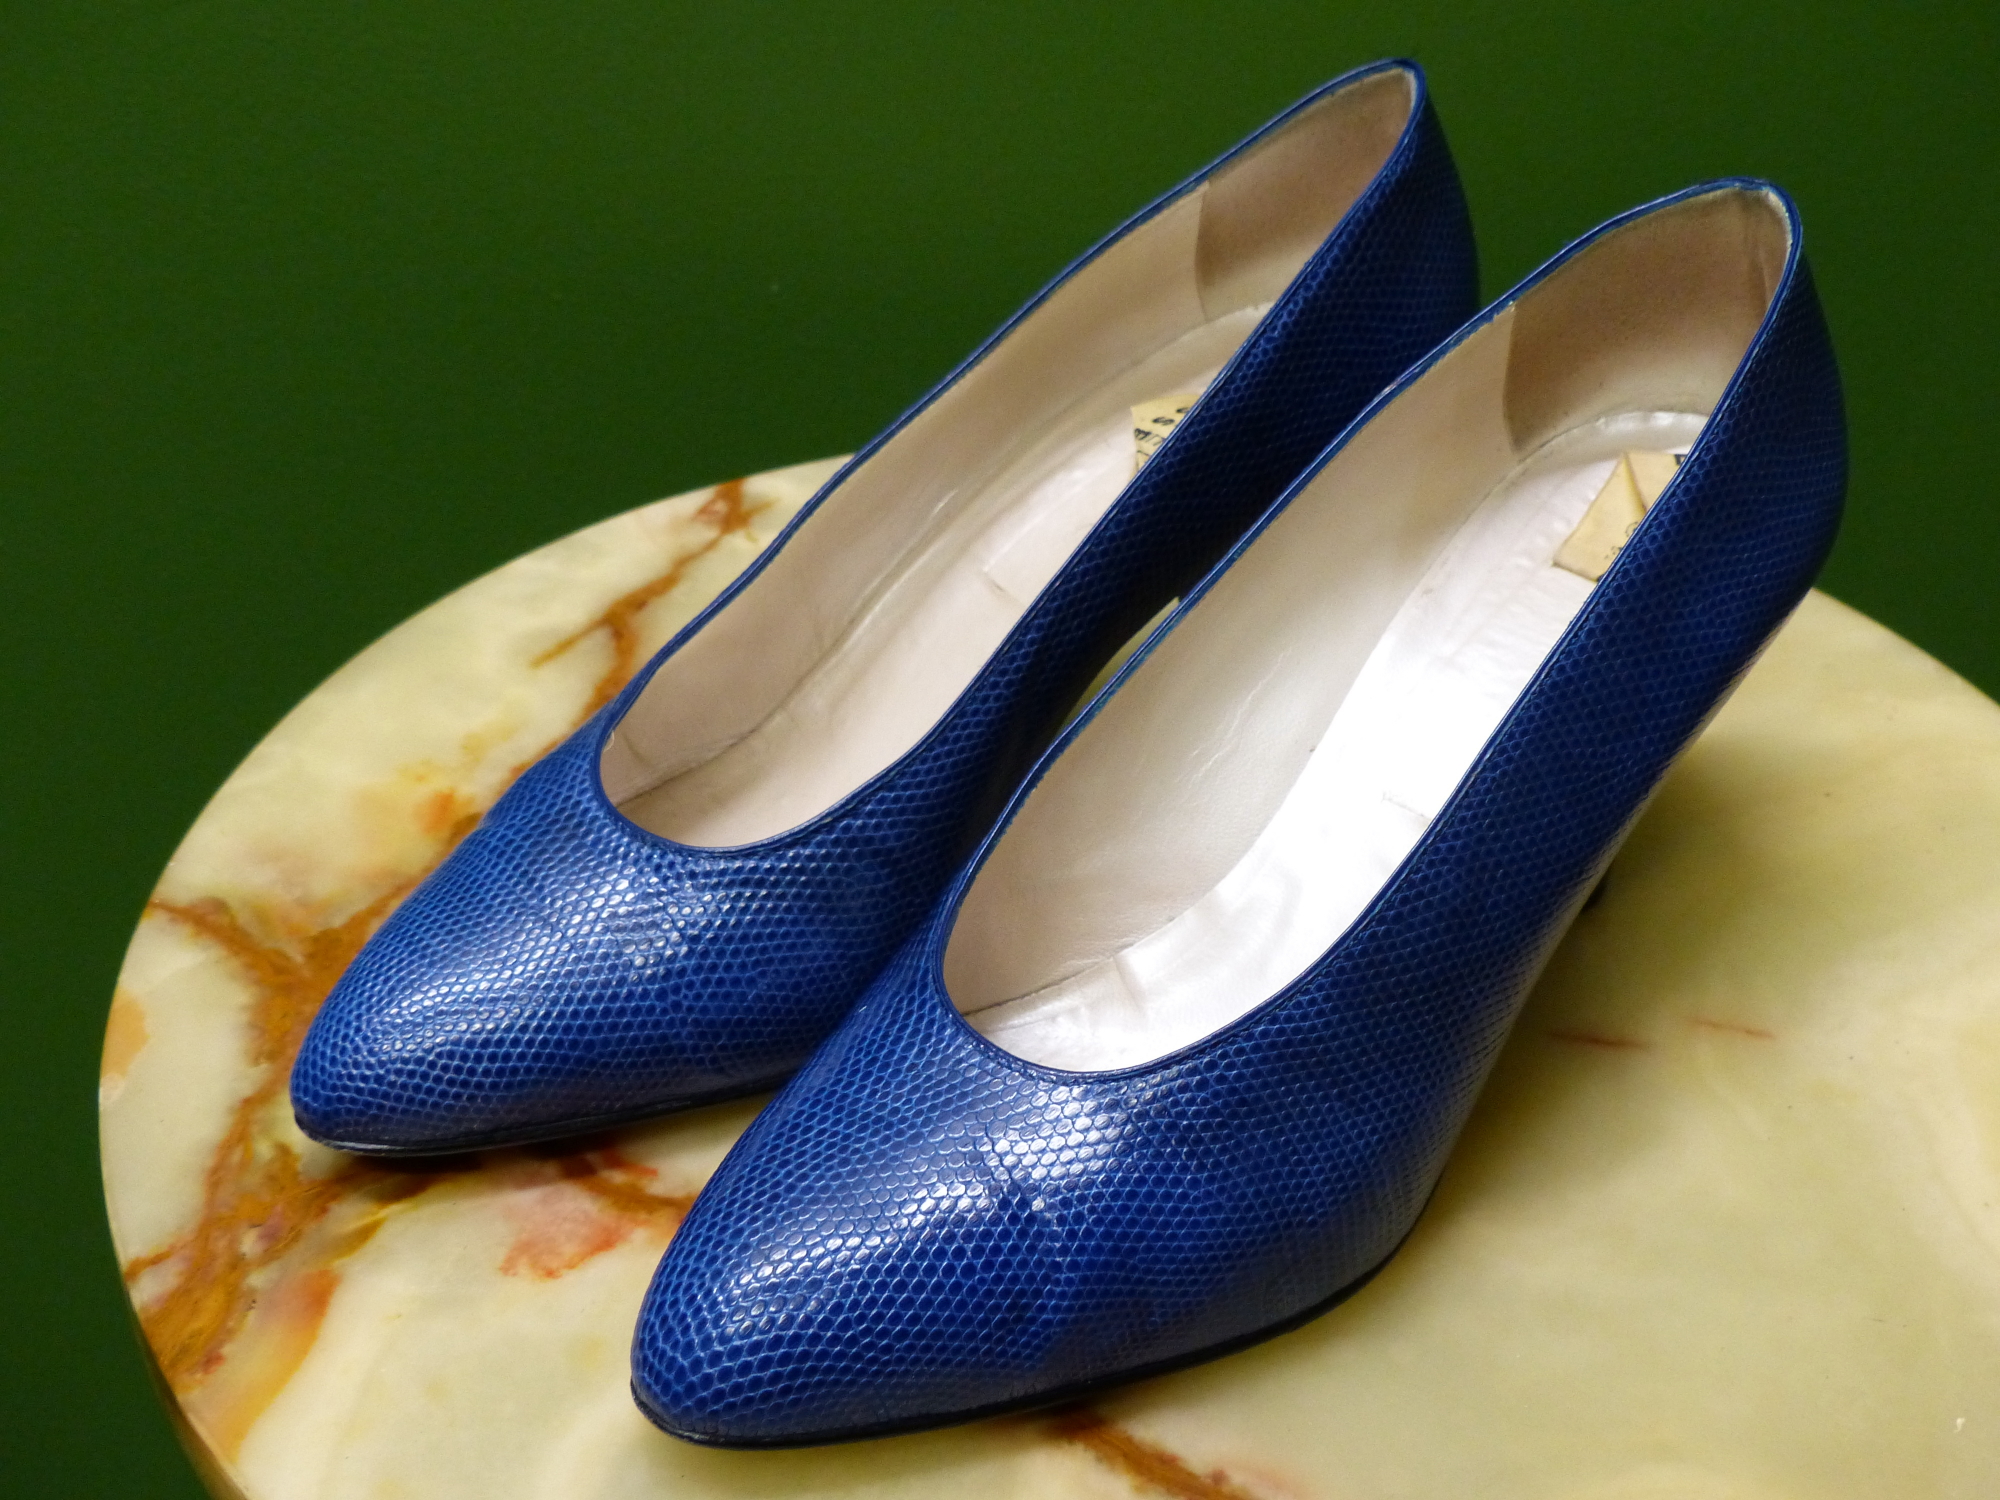 SHOES. FRATELL ROSSETTI BLUE CROC STYLE EUR SIZE 39.5, TOGETHER WITH PETER KAISER CAFE SUEDE UK SIZE - Image 5 of 12